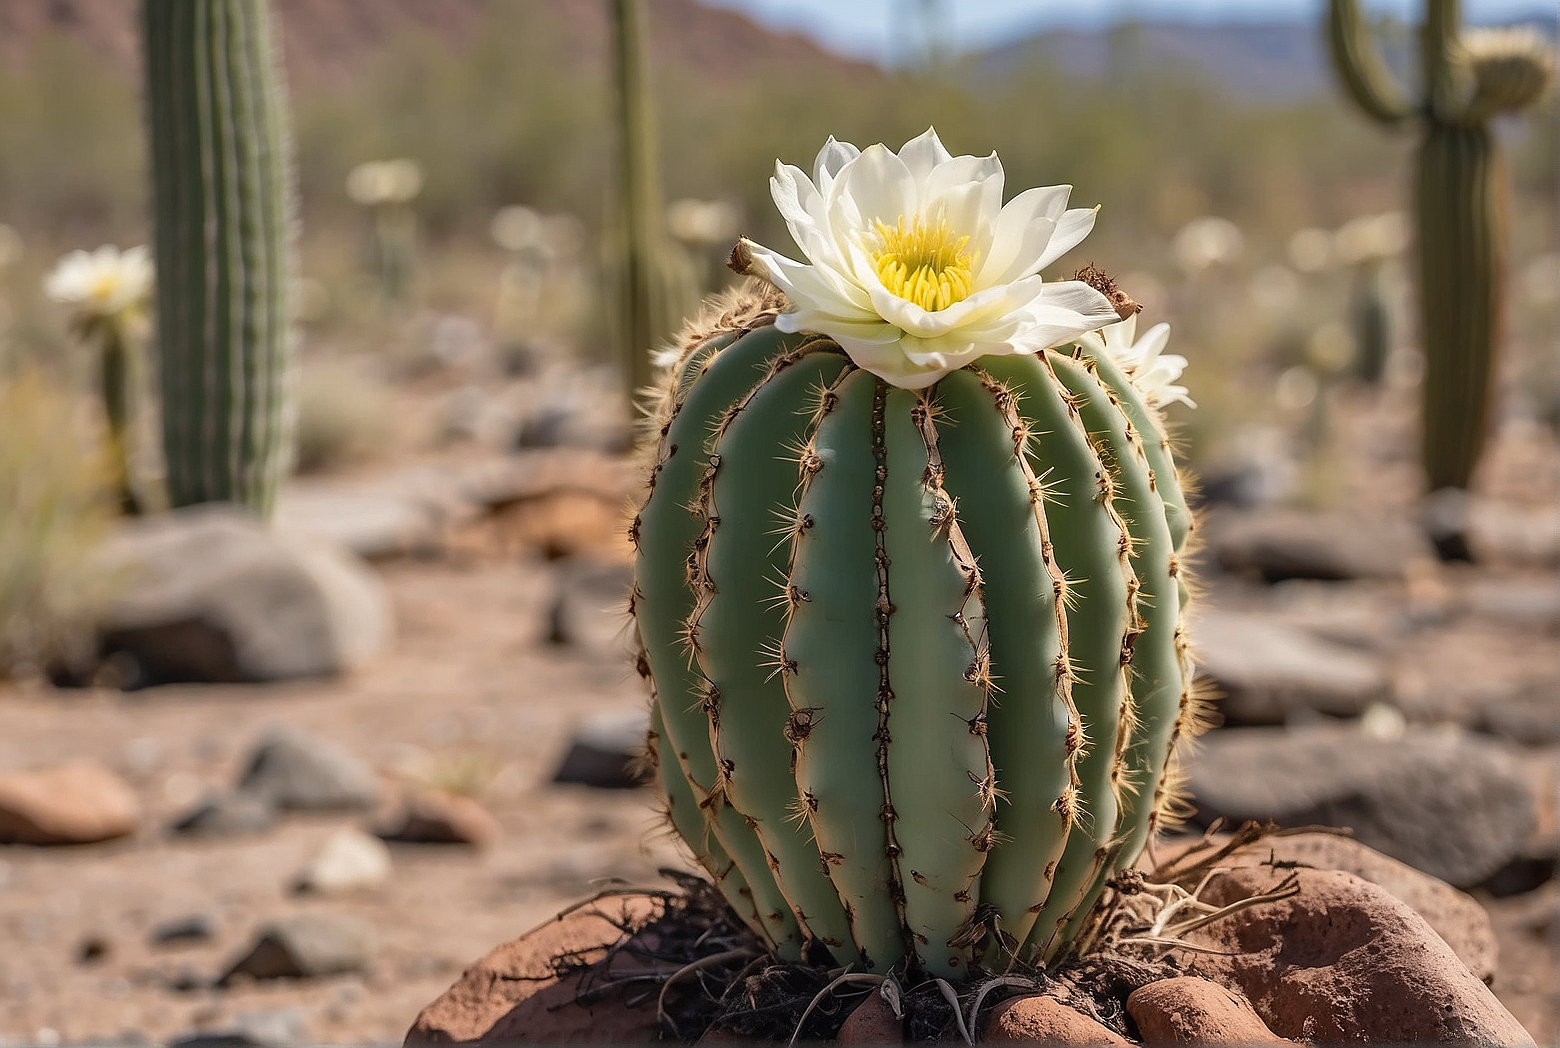 The Reproduction Process of Saguaro Cacti